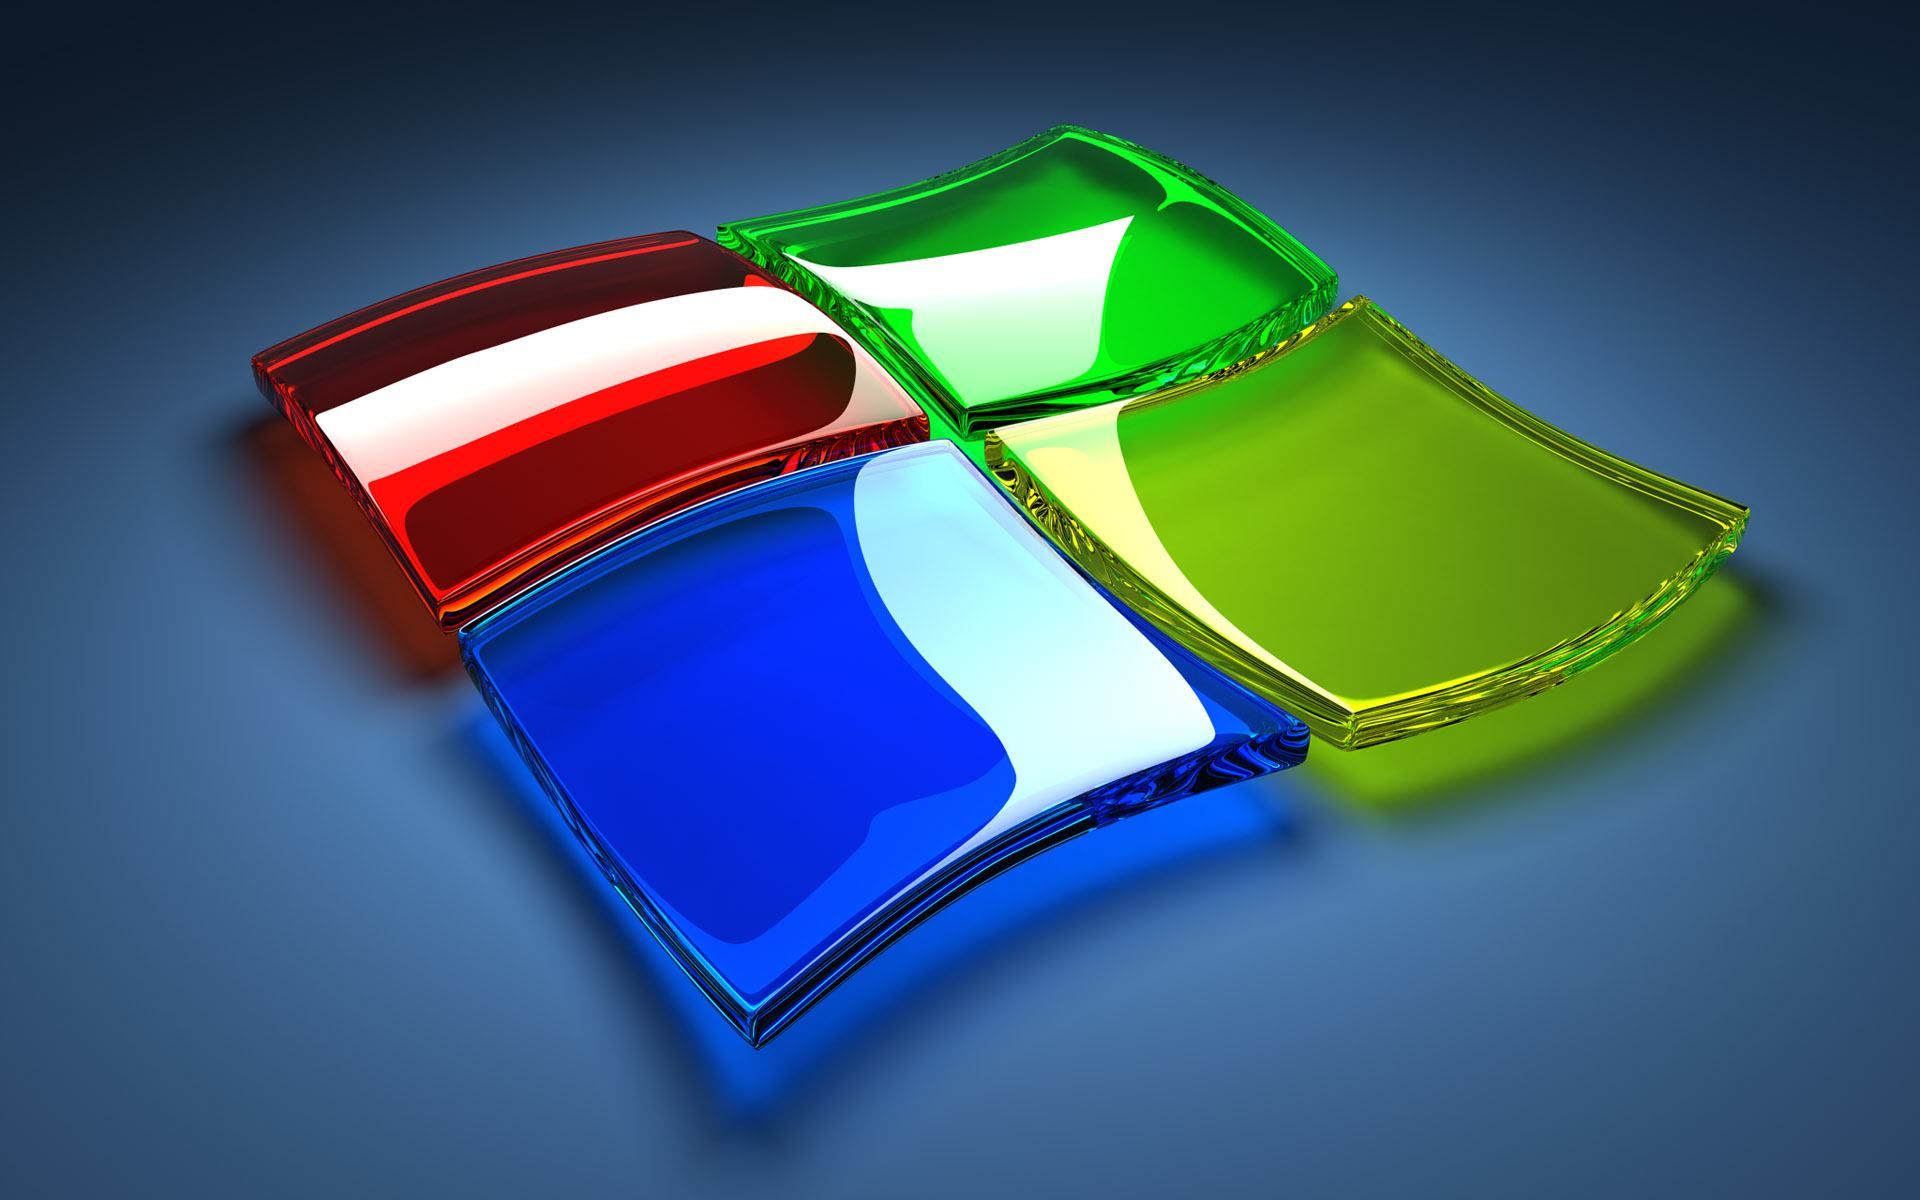 7 Best Desktop And Windows 8 Animated 3D Wallpapers - I Am Qurat